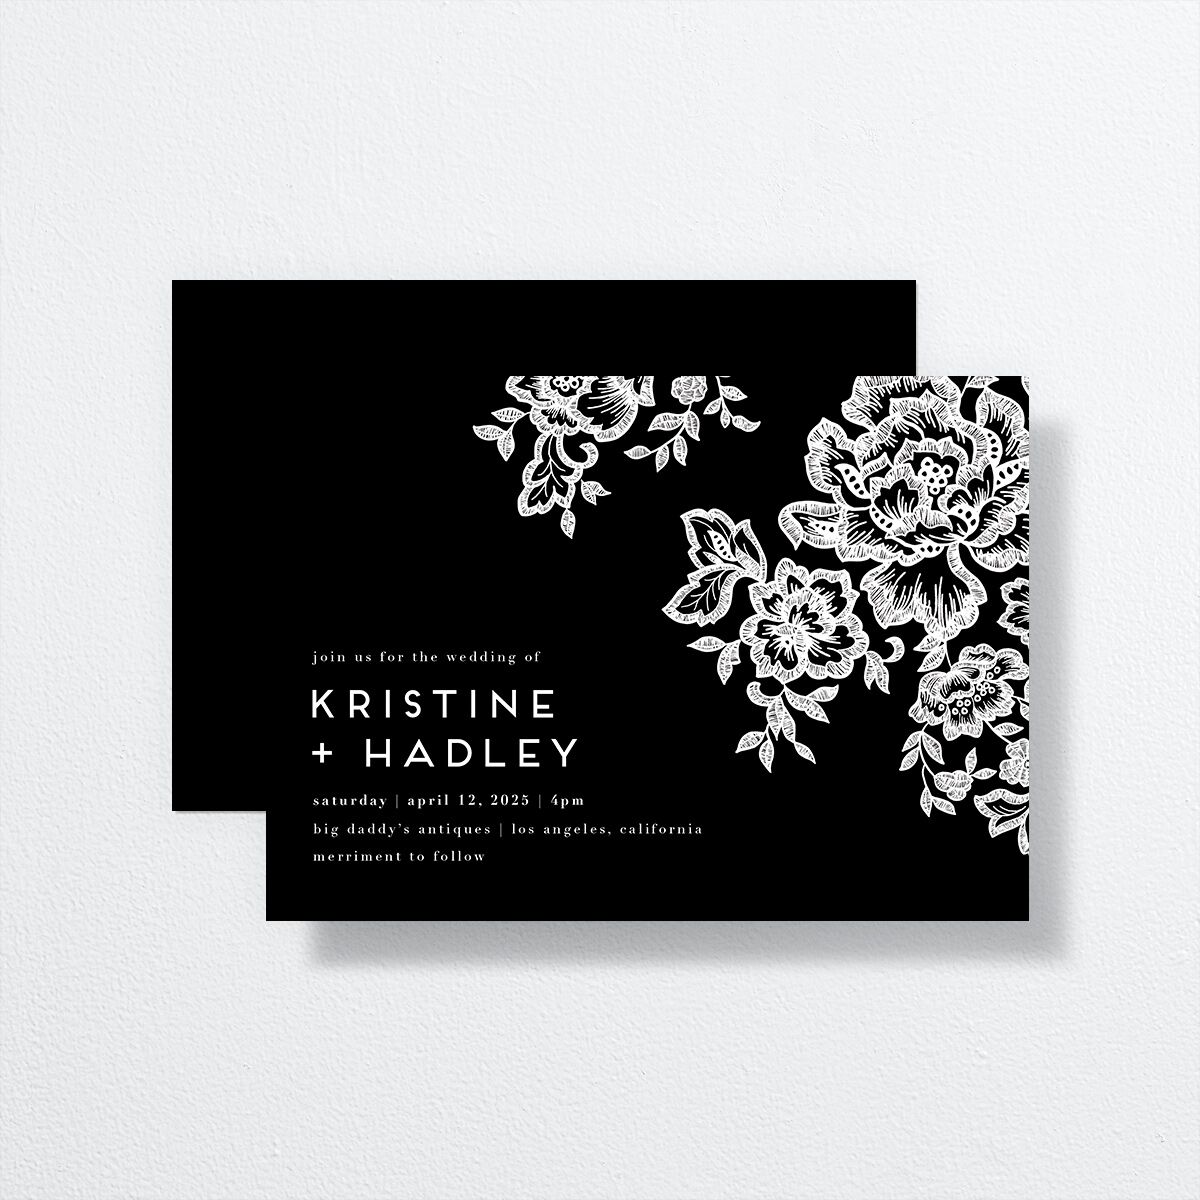 Lace Wedding Invitations by Vera Wang front-and-back in black